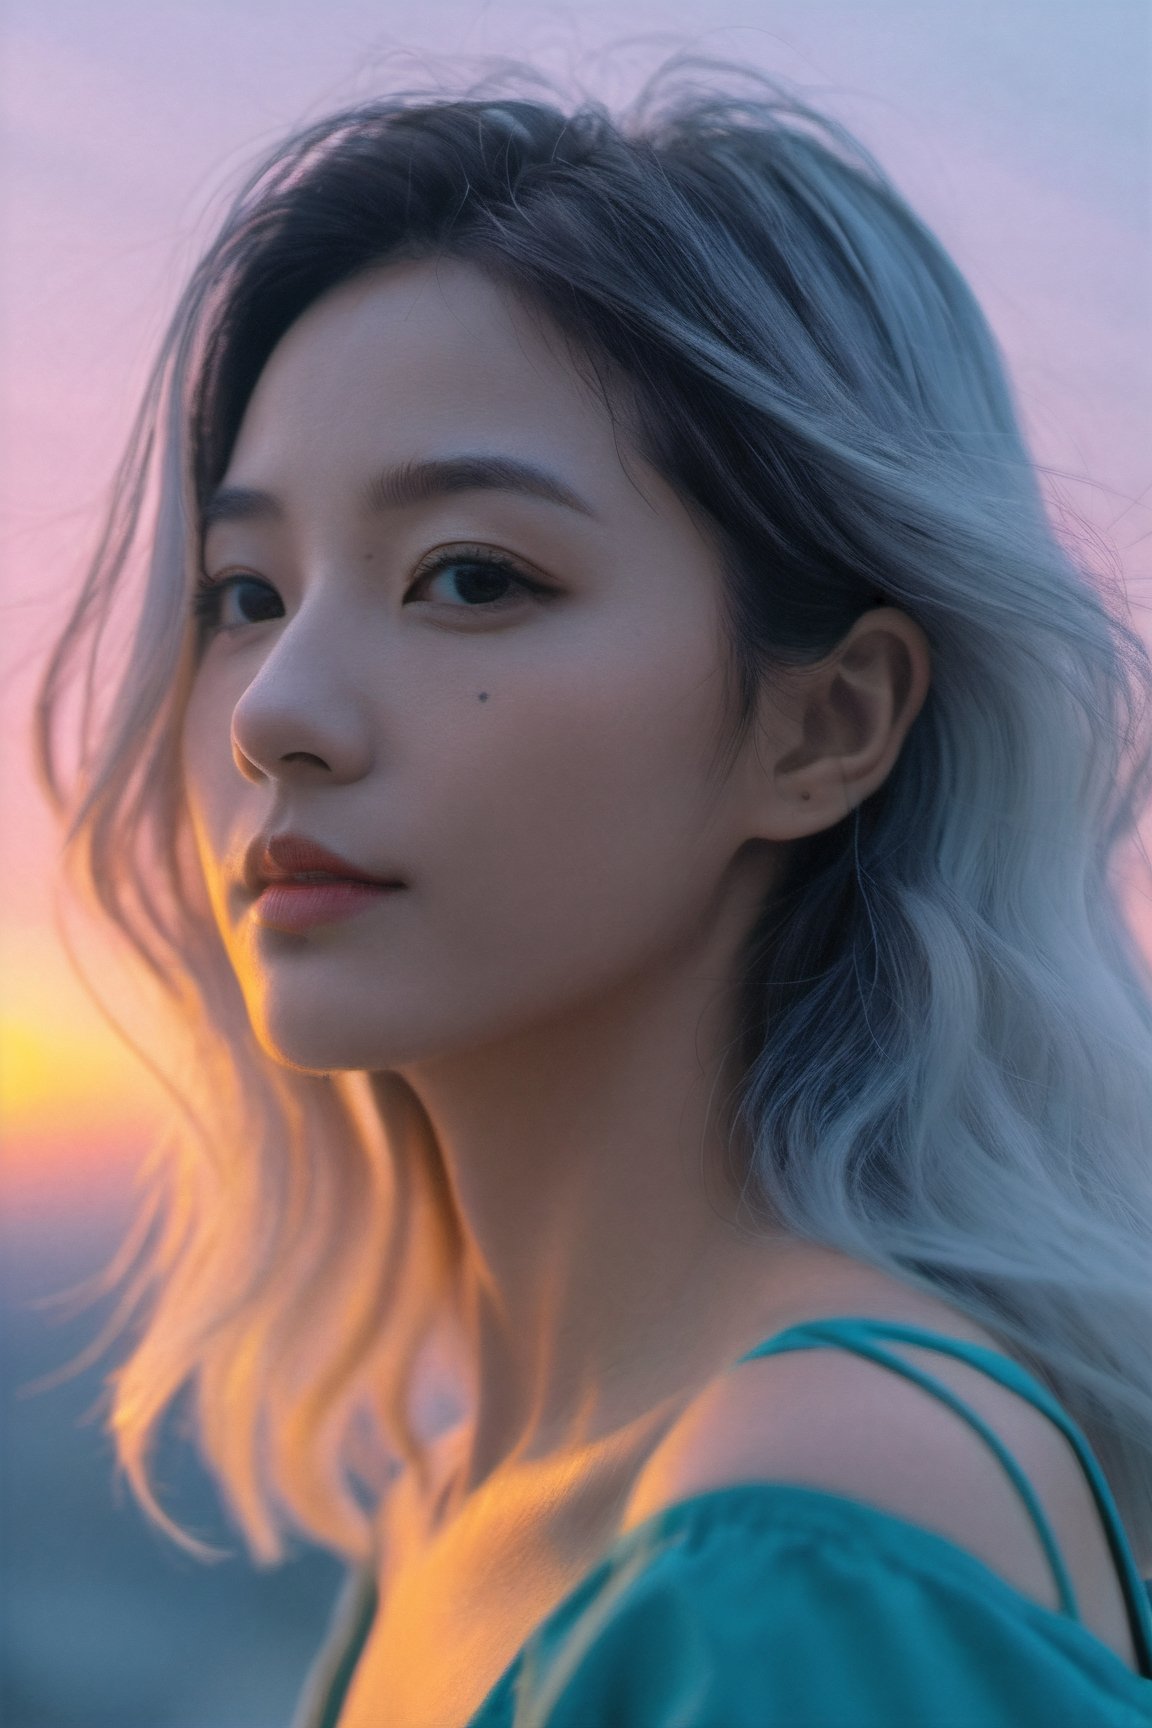 xxmixgirl, (masterpiece:1.0), (highest quality:1.12), (HDR:1.0), a girl with long wavy hair looking at viewer, (white hair), smile, with a teal background and Sunset sky, constant, vaporwave colors, a character portrait, synchronization, detailed, realistic, 8k uhd, high quality
,himeno,Mechanical part,Leonardo Style,